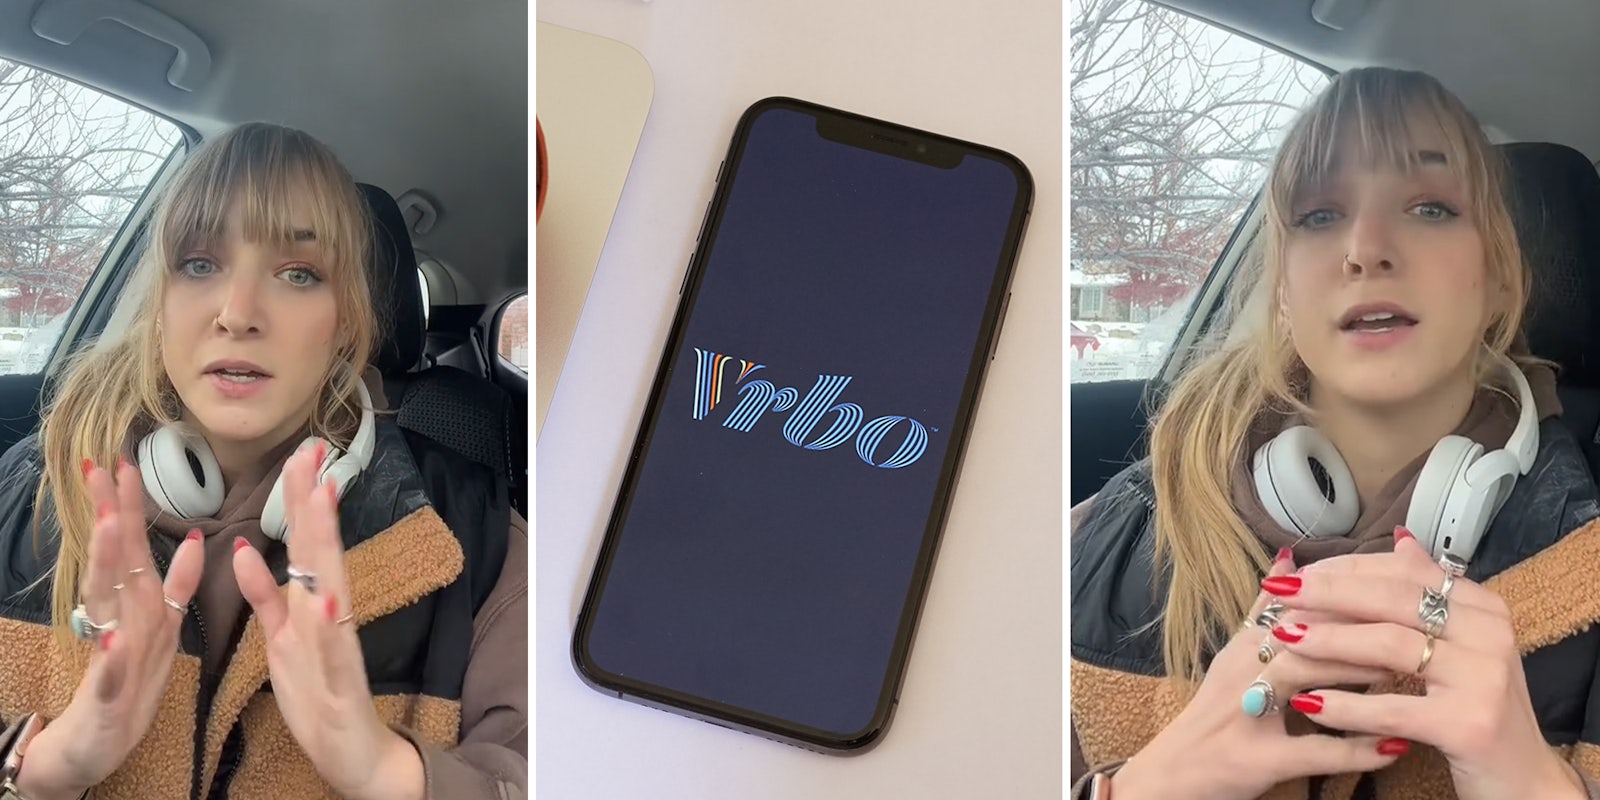 Vrbo renter gets woken up at 2:30am by the homeowner who had no idea she’d be there. Vrbo won’t do anything about it